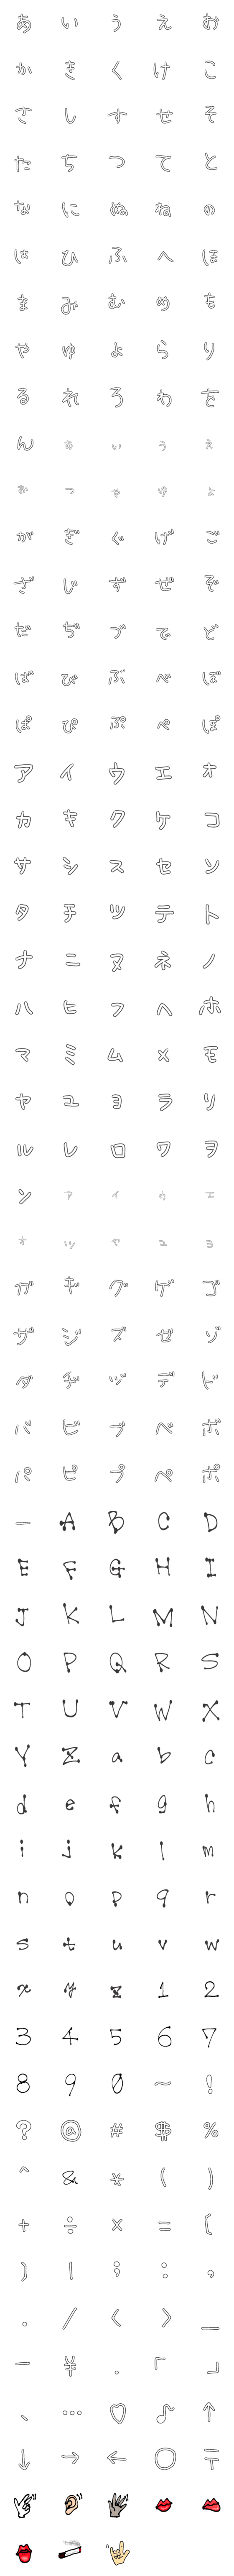 [LINE絵文字]黒文字Simpleの画像一覧